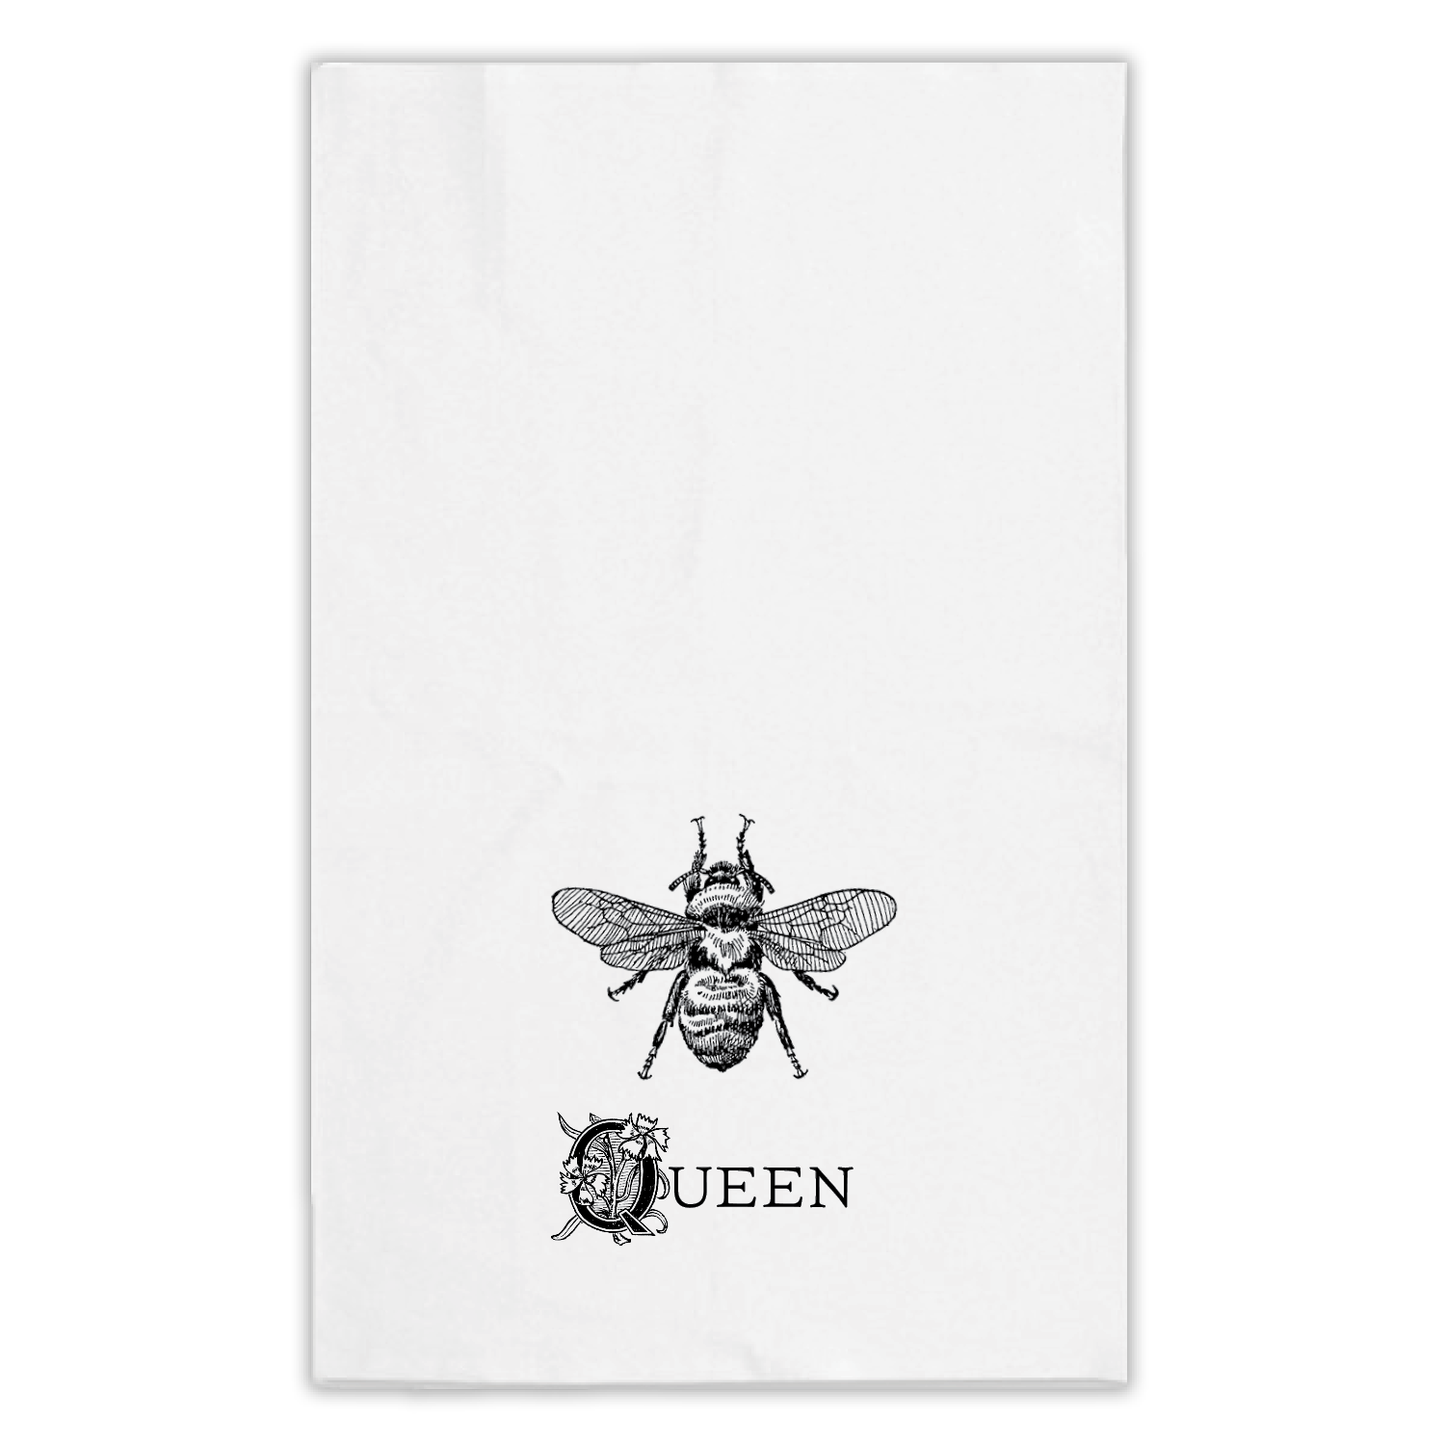 Queen bee tea towel with a bee and decorative ornate Q printed on a kitchen towel